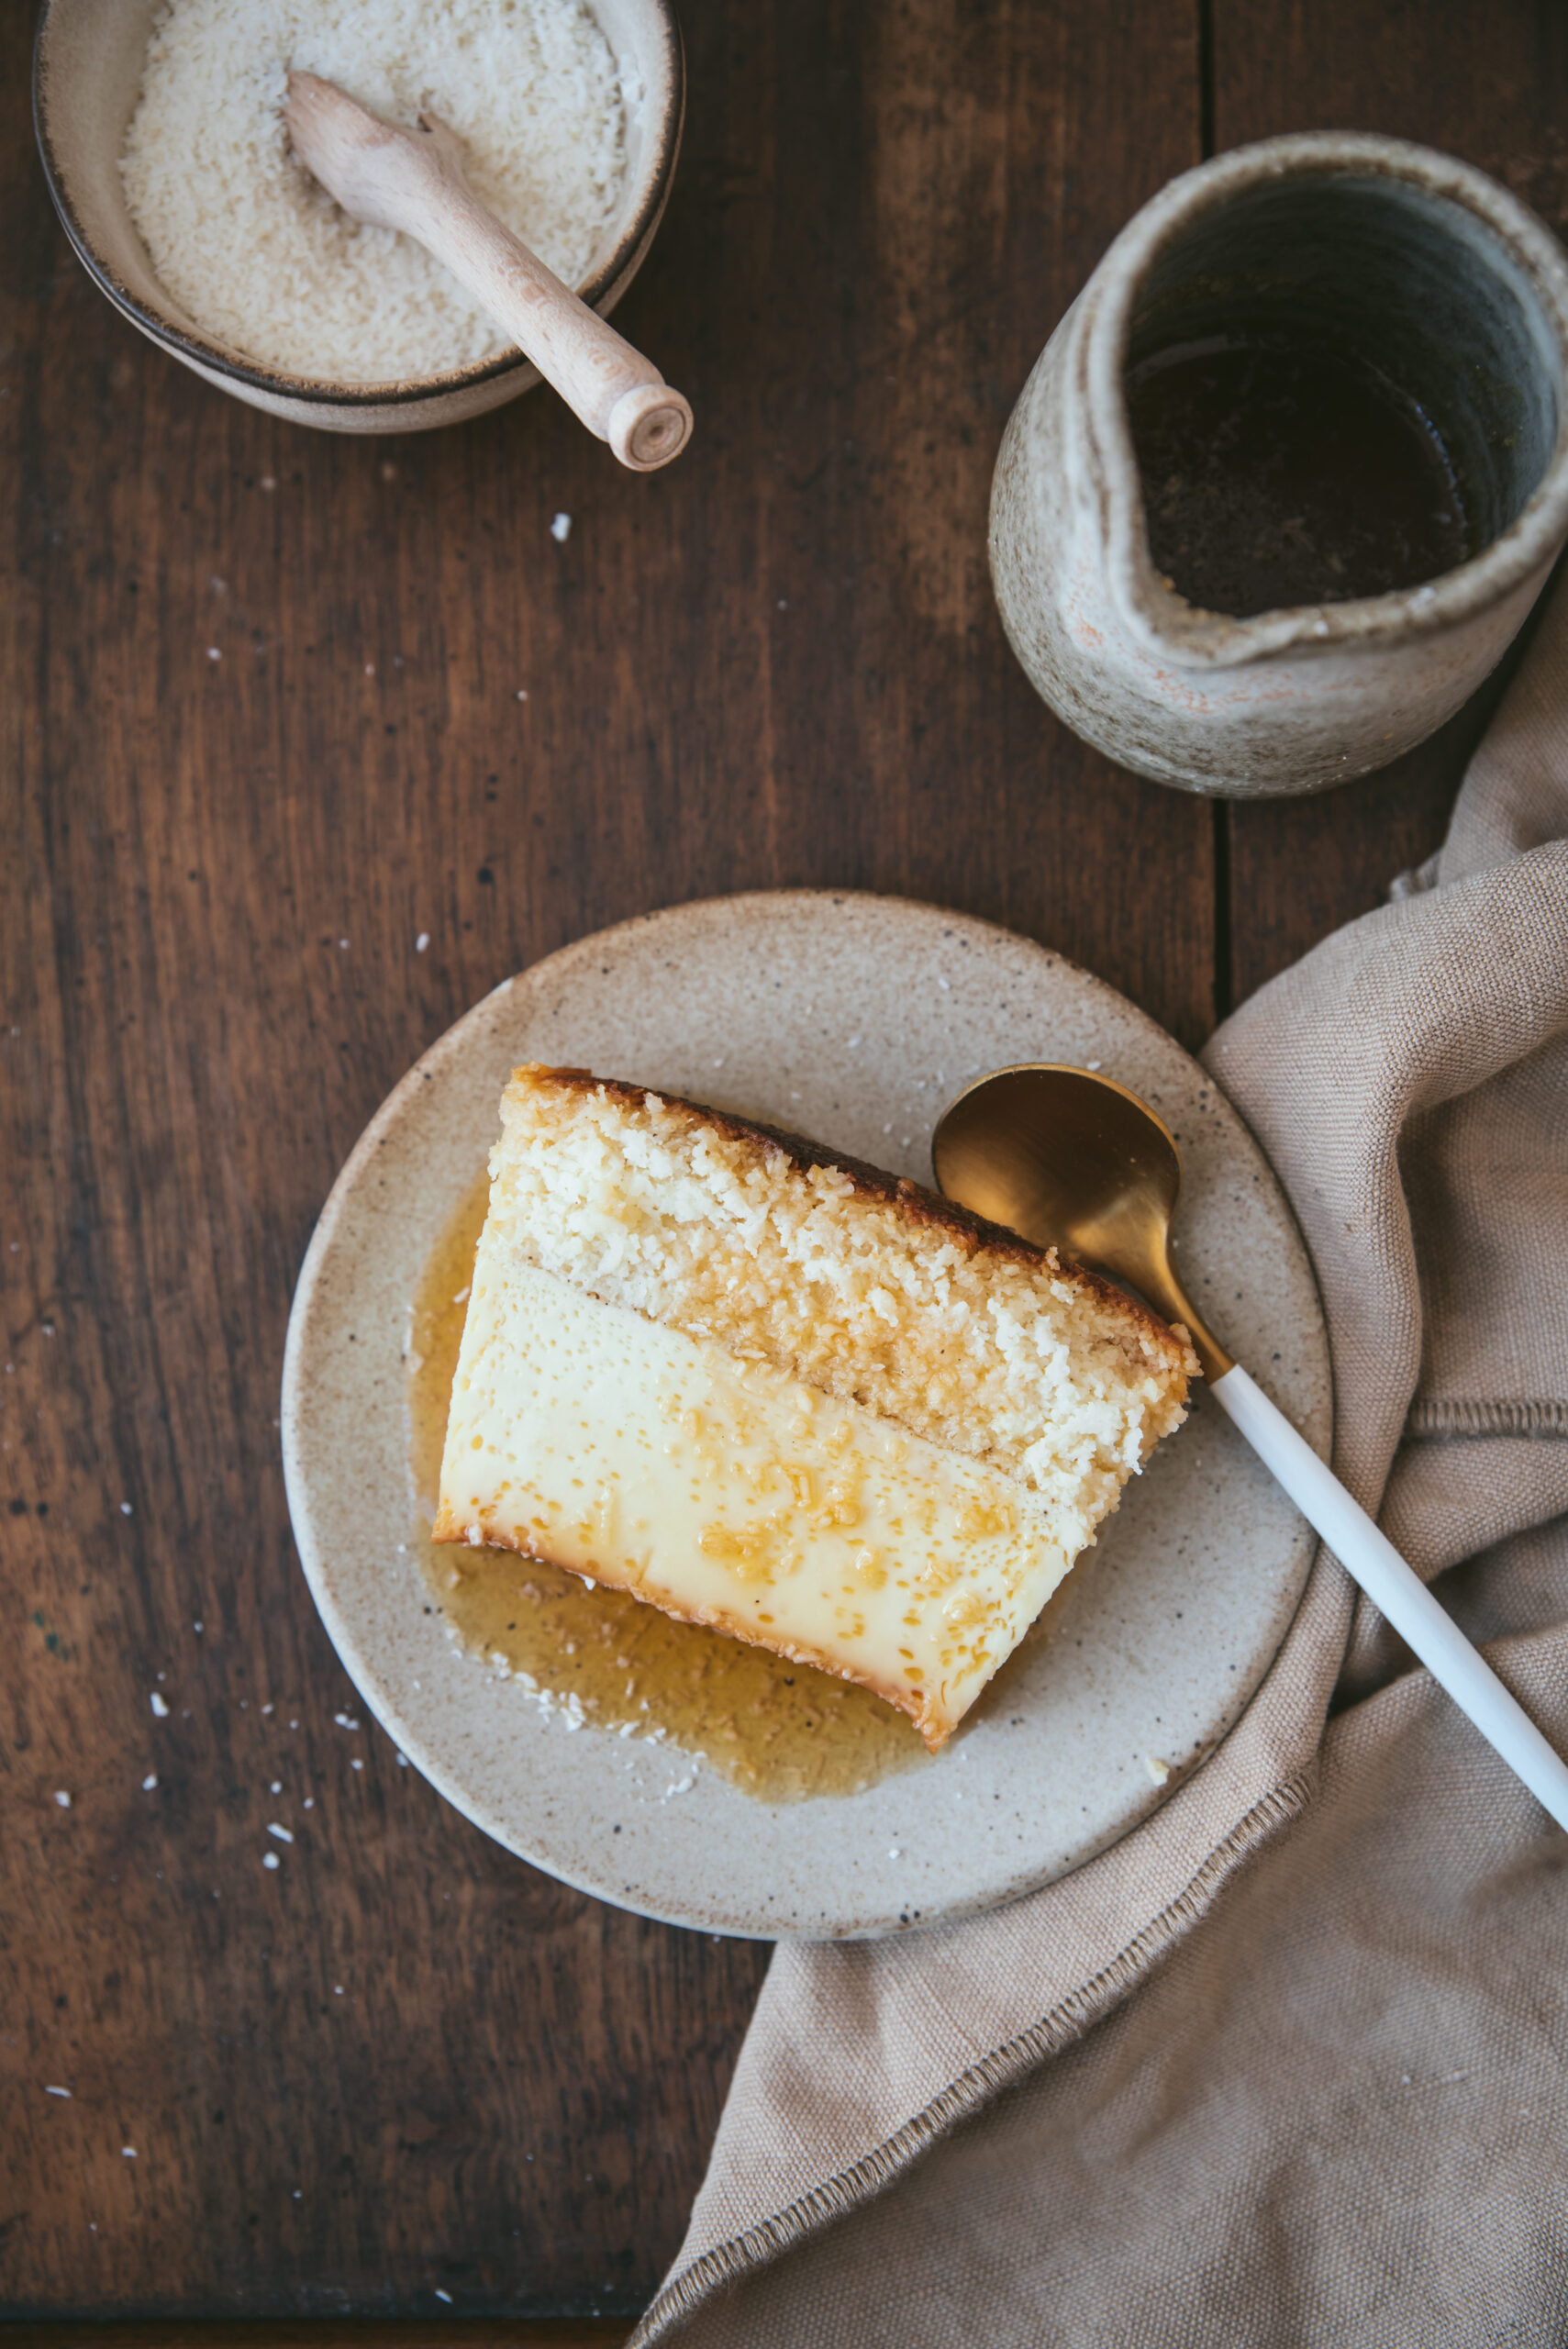 West Indian coconut and caramel flan recipe